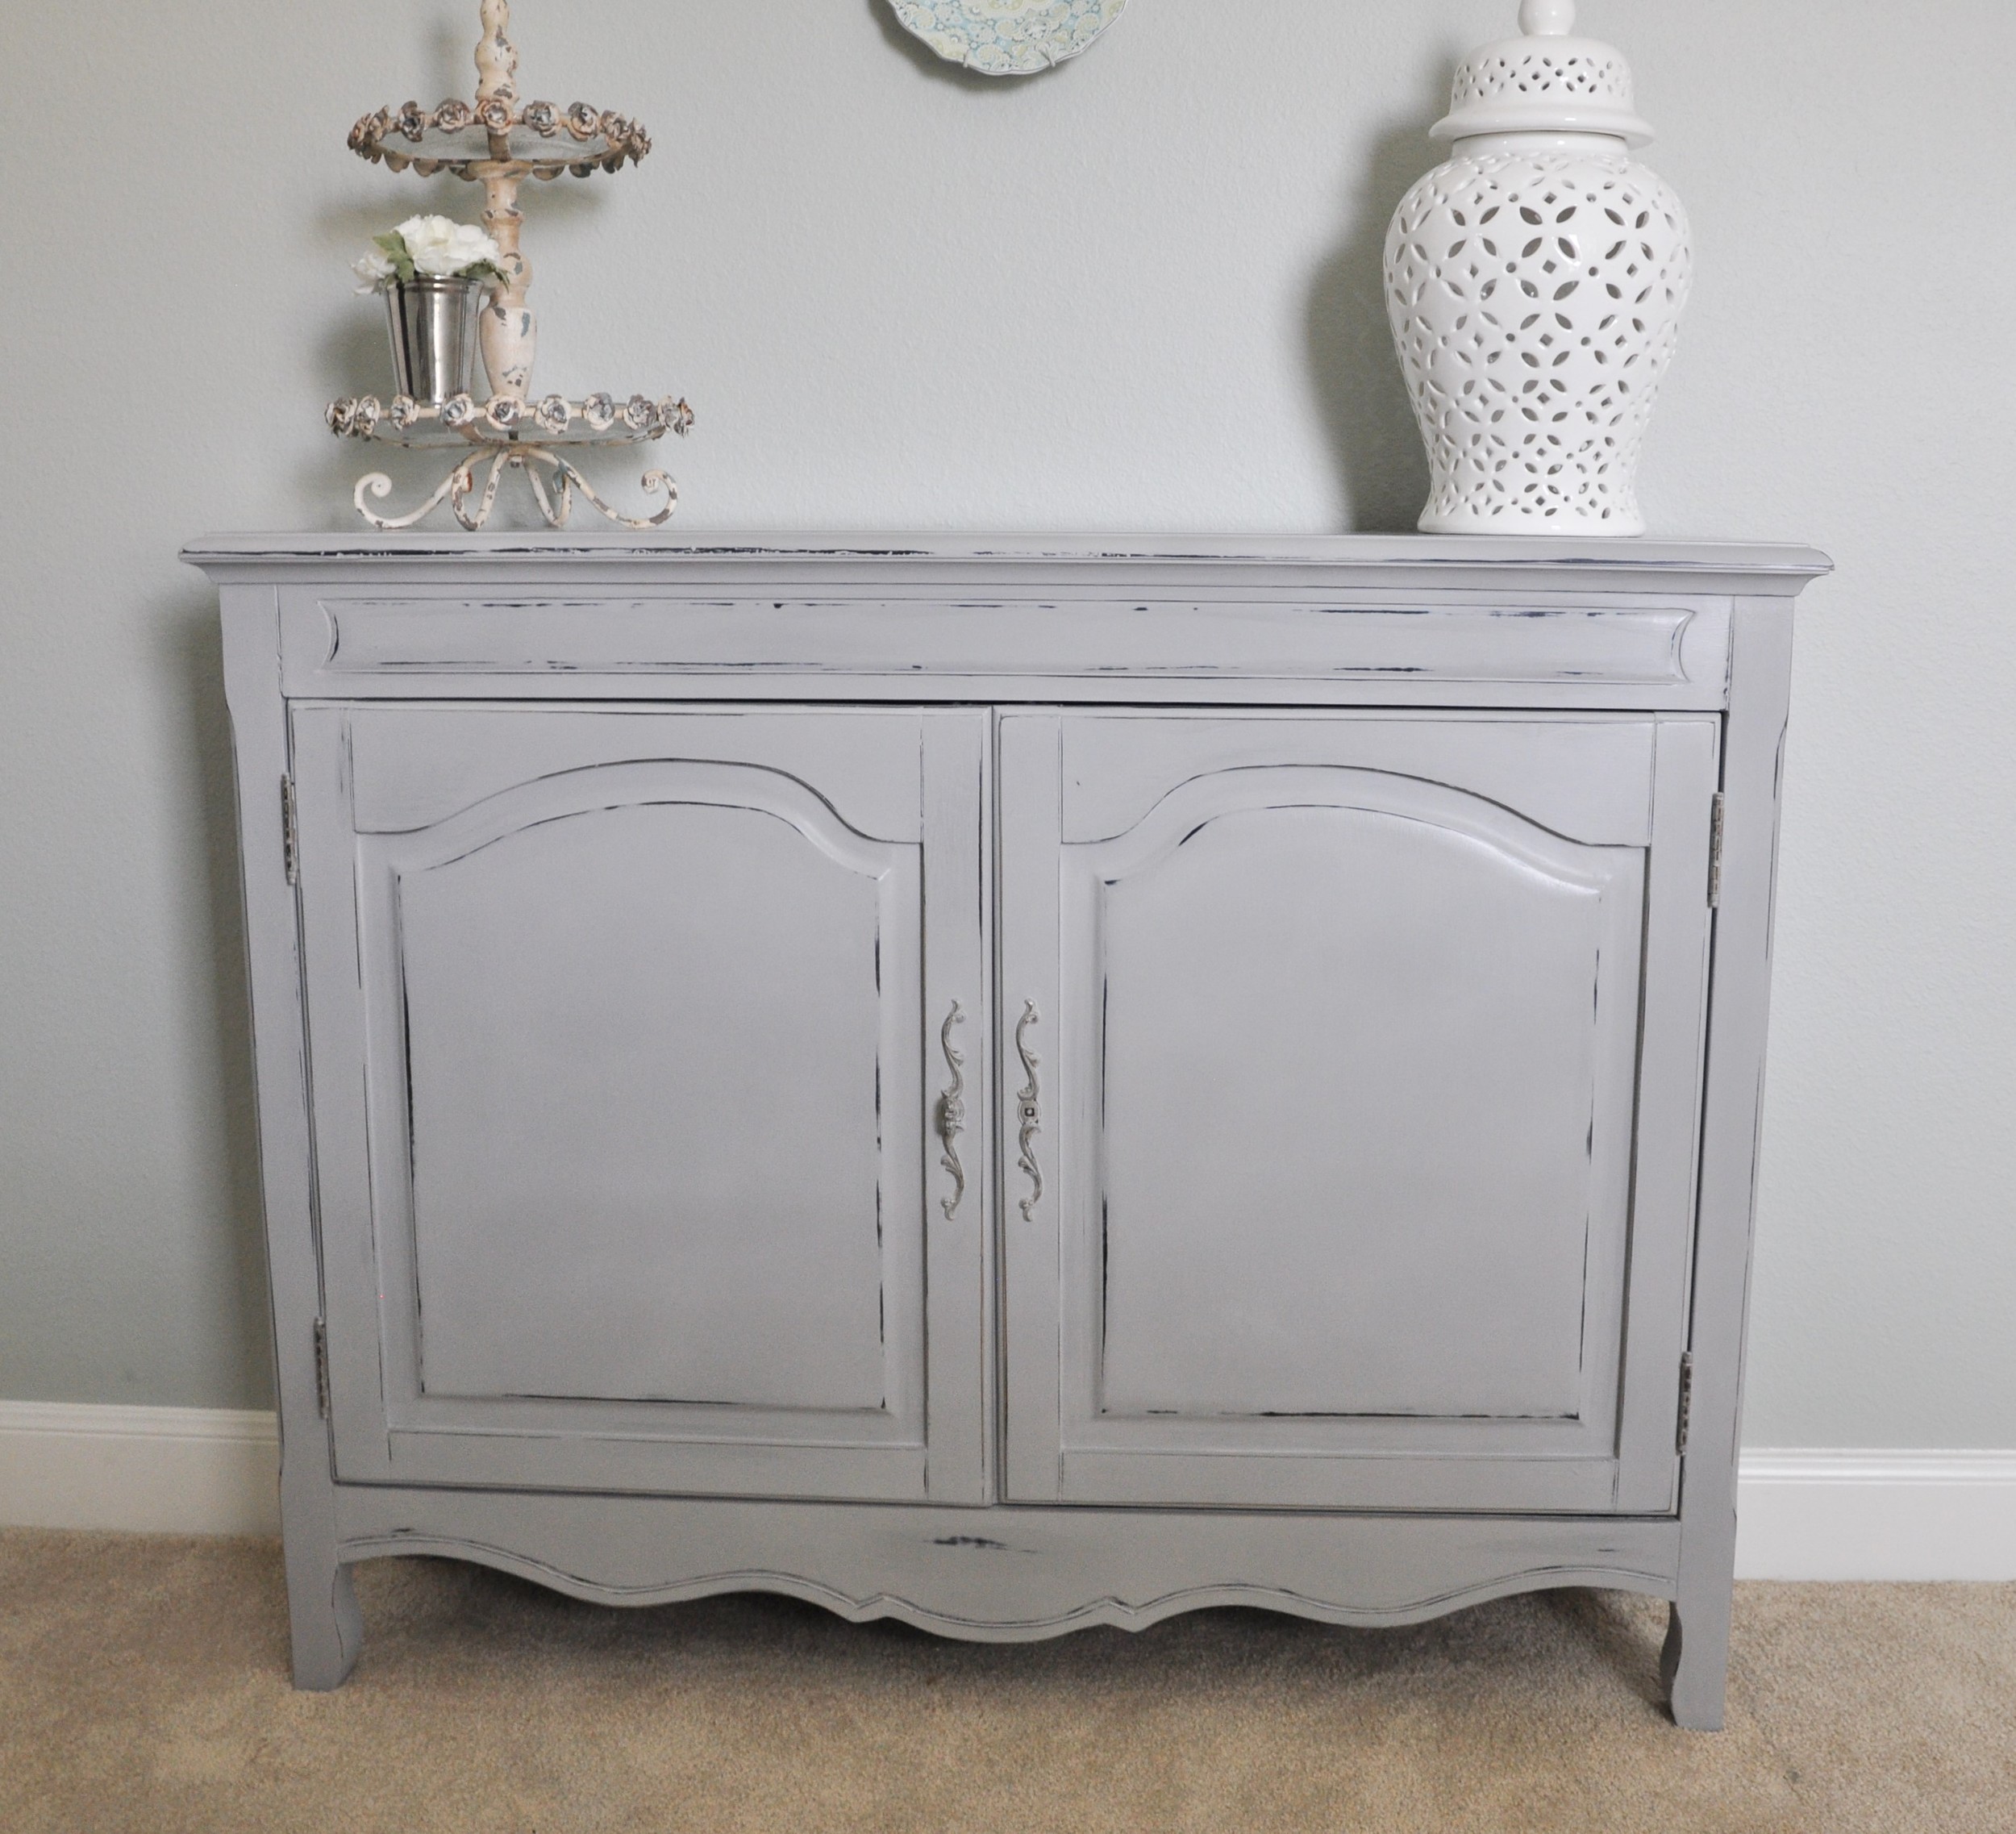 How to Use Waverly Chalk Paint and Wax